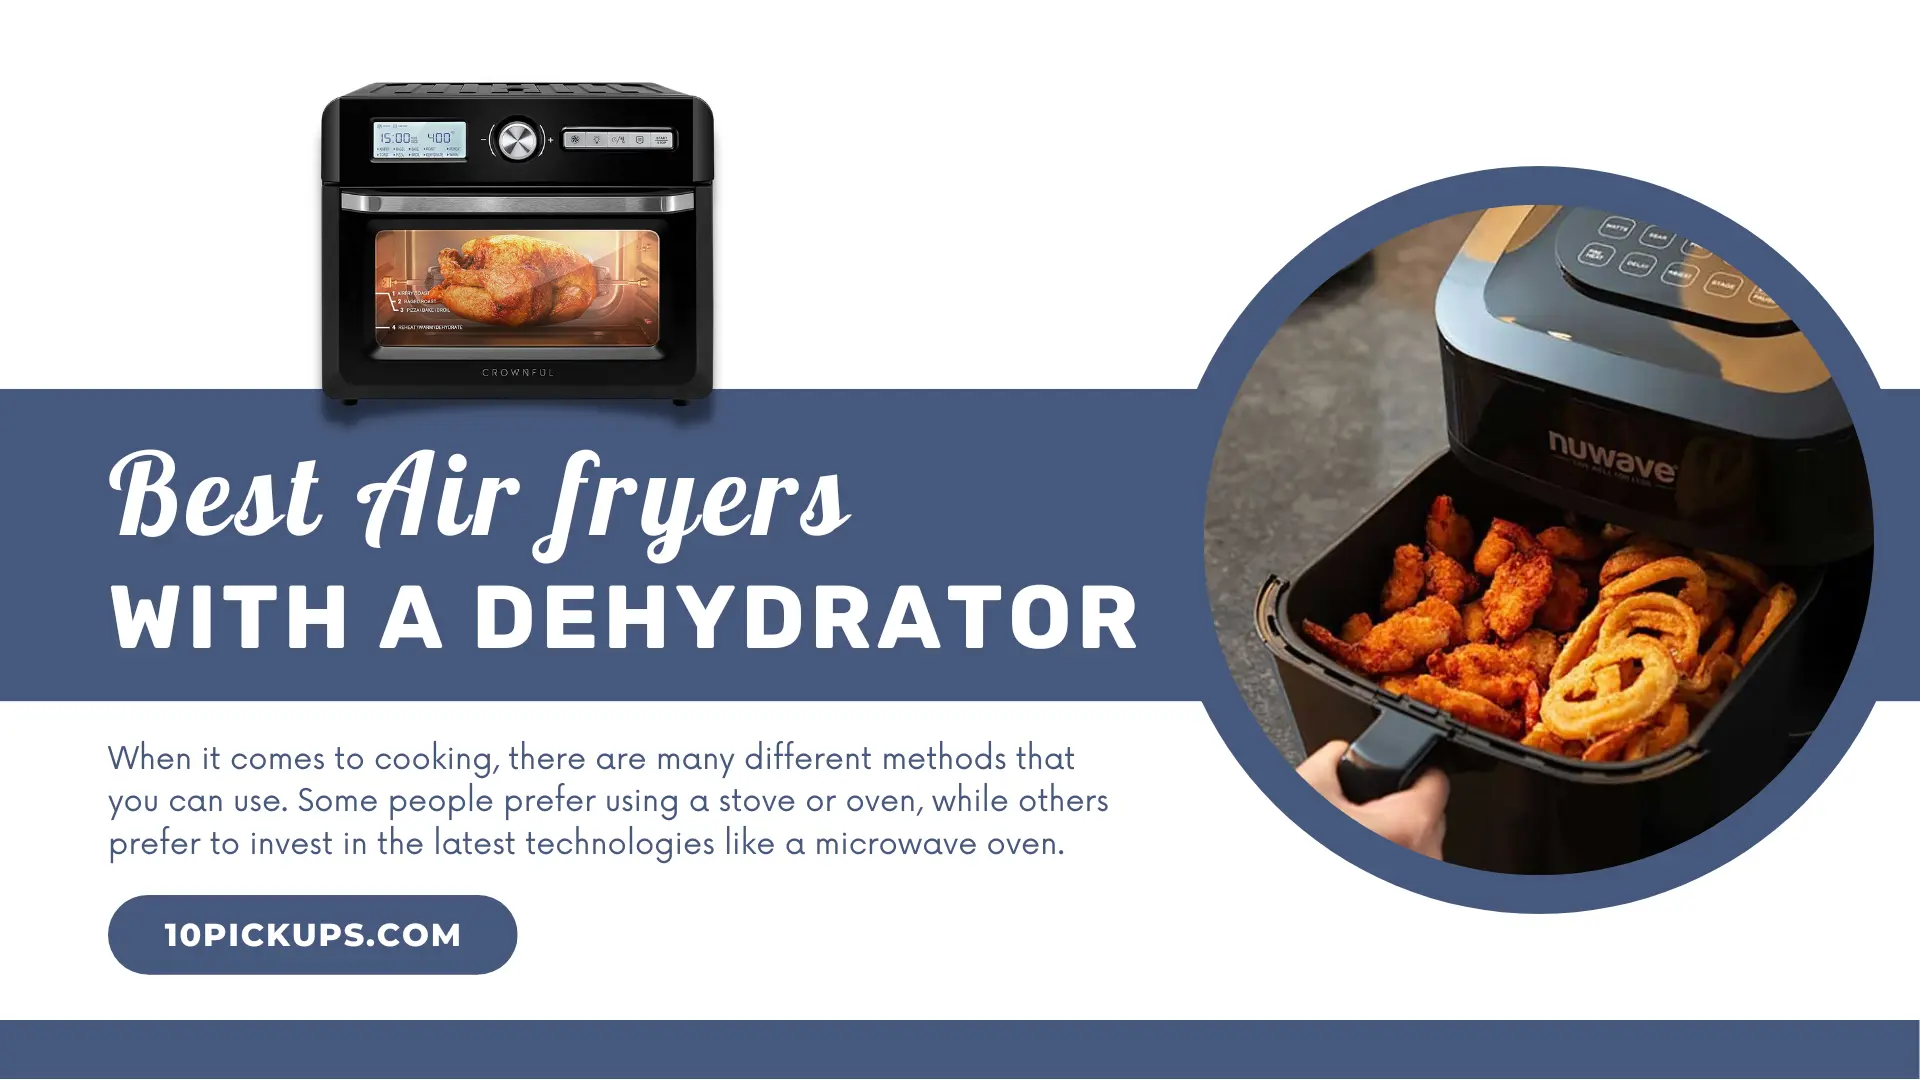 Best Air fryers with A Dehydrator